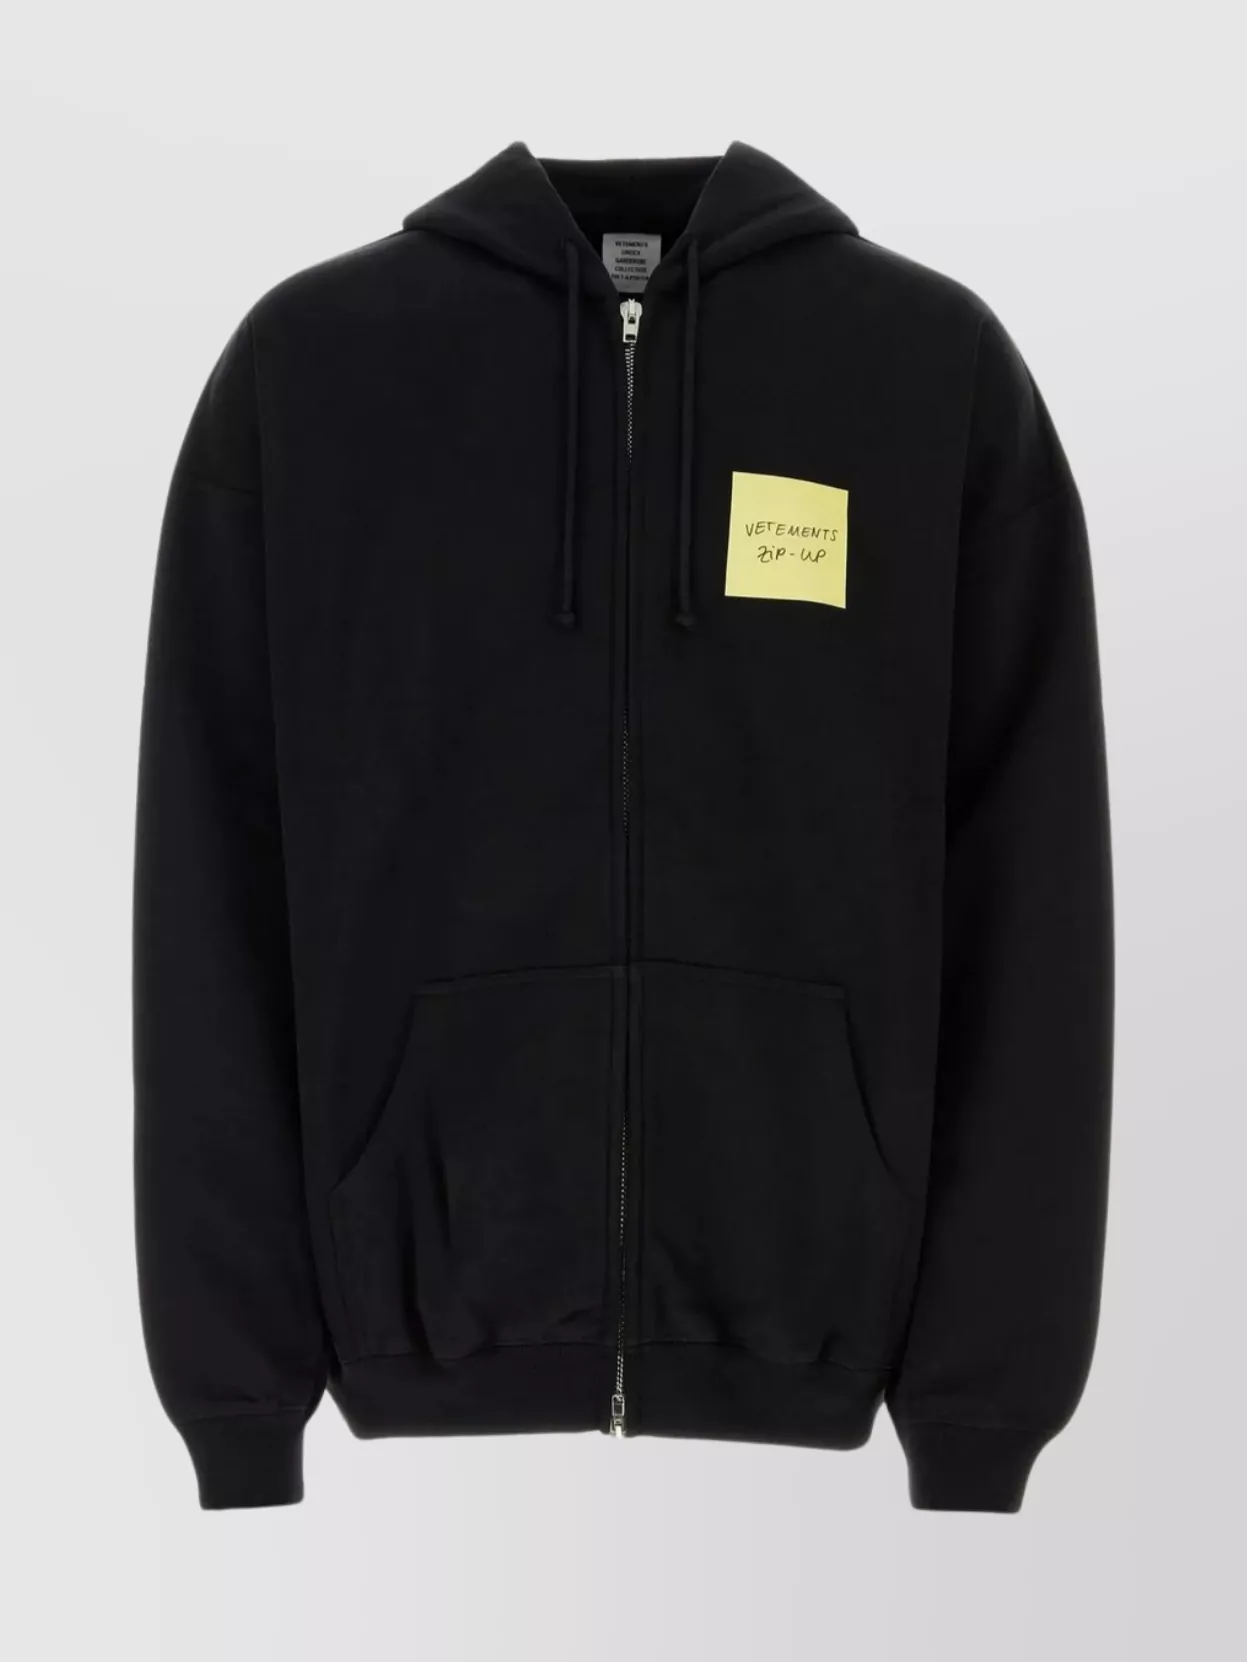 Vetements Hooded Sweatshirt With Pockets And Stretch Fabric In Black